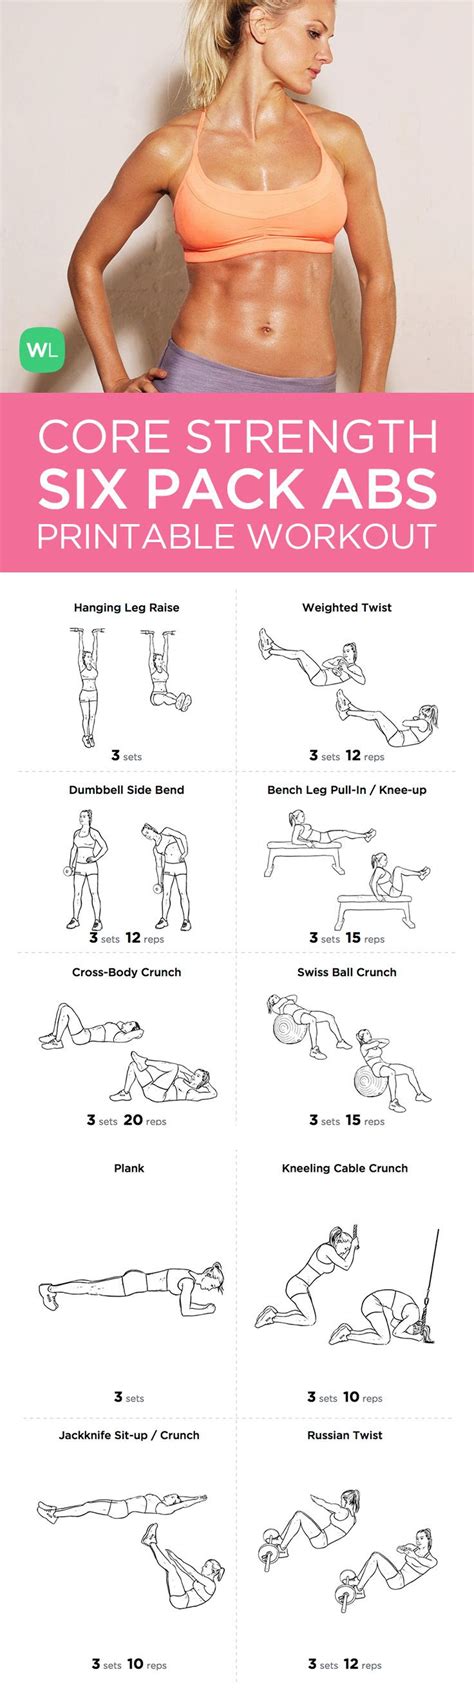 Plant Today The Best Exercises For Six Pack Abs